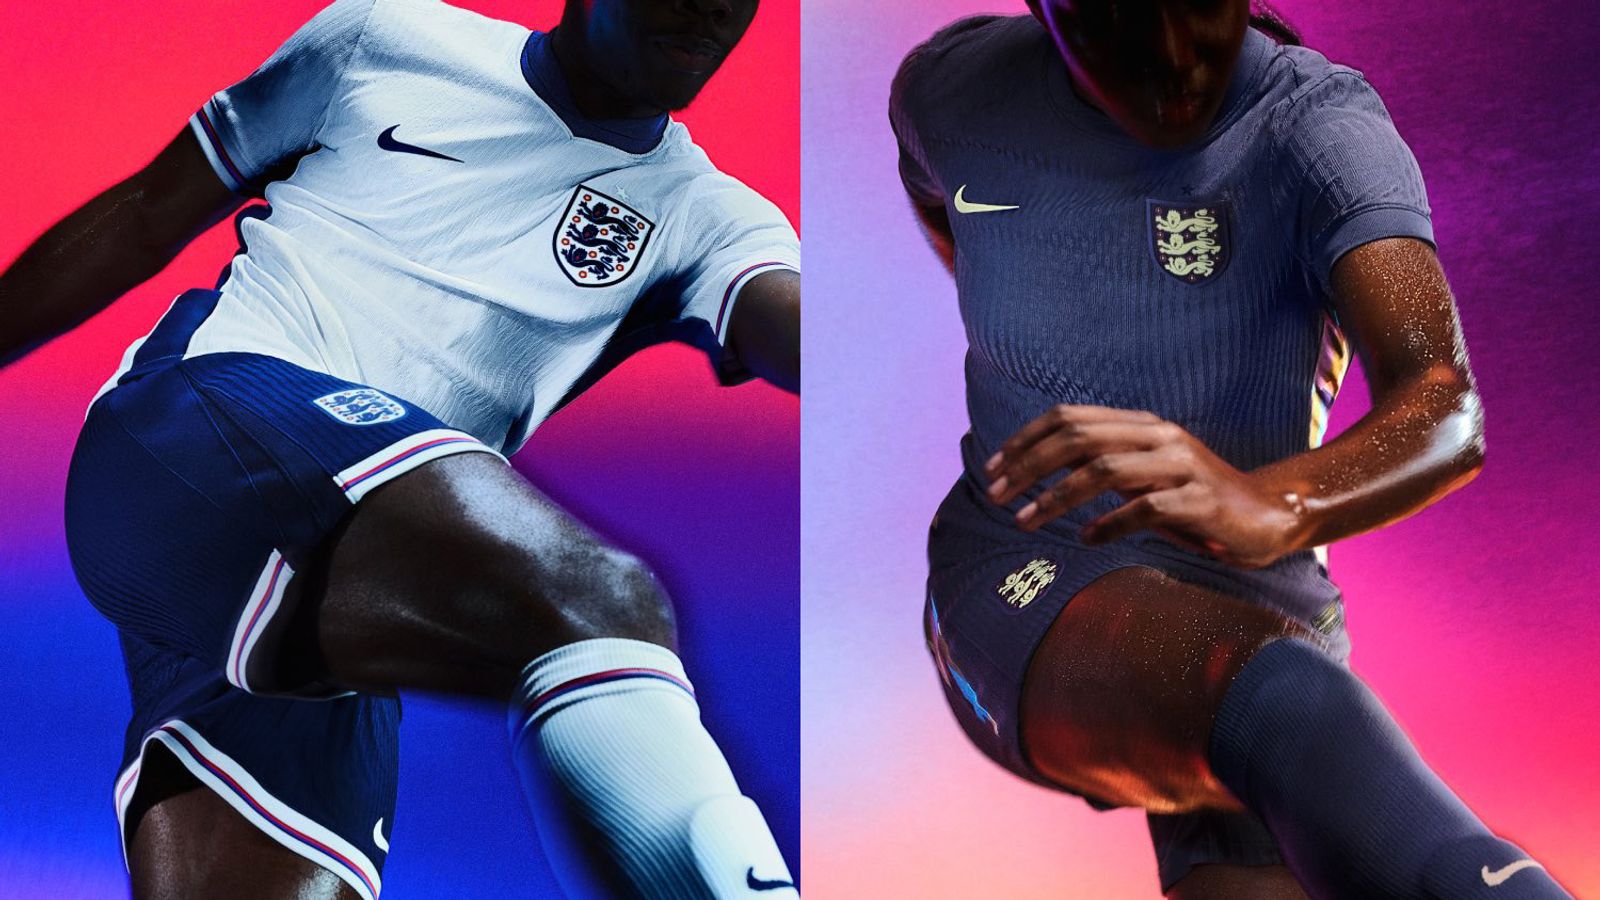 Sir Keir Starmer backs calls for Nike to scrap new England football kit over redesigned St George cross